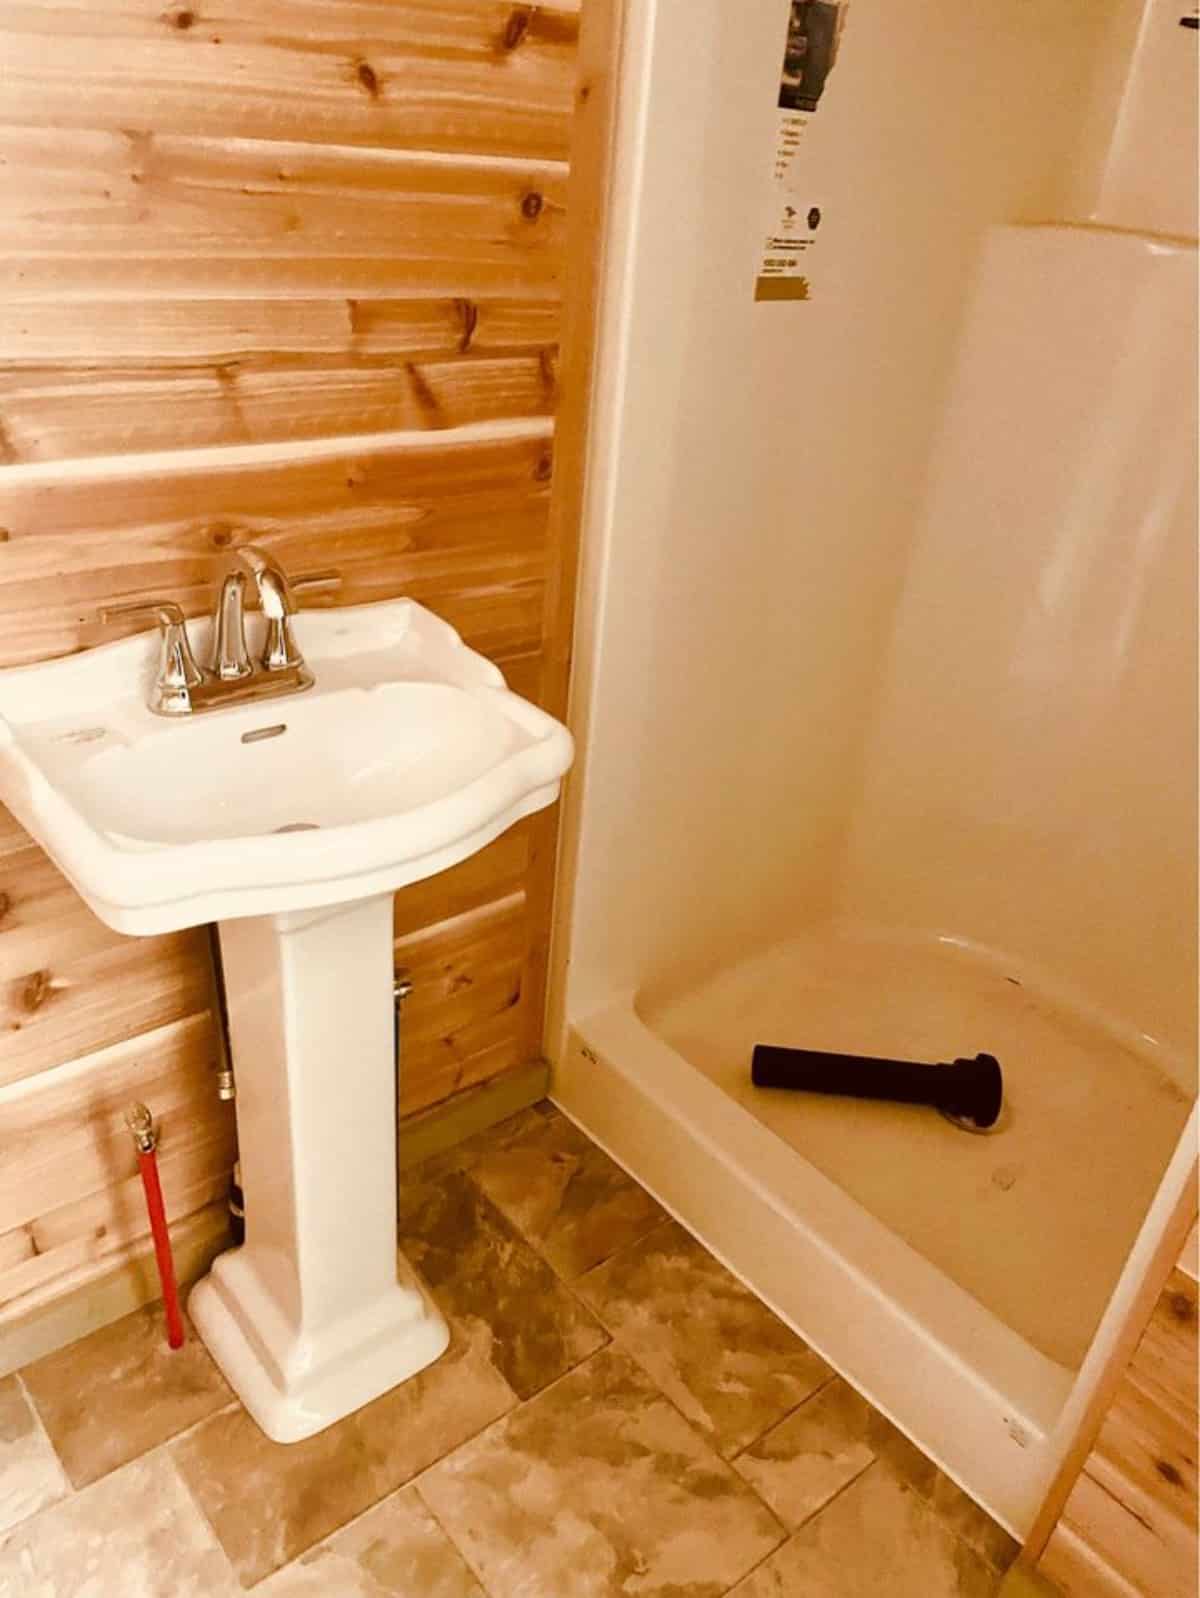 Sink and shower area of Gorgeous Red Cedar Tiny Home